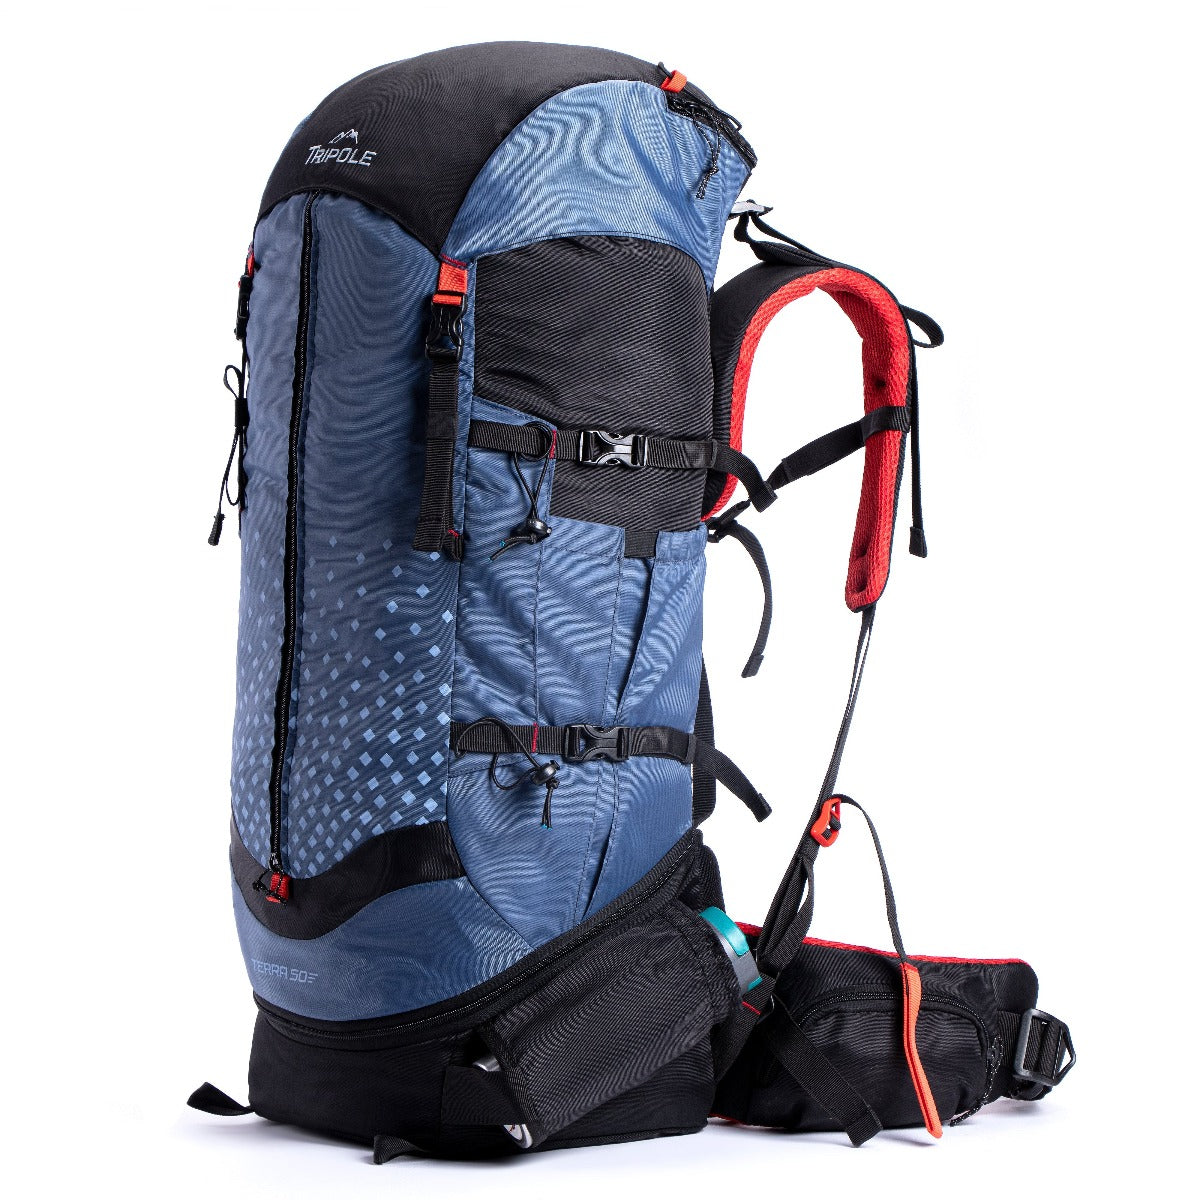 Tripole Terra Metal Frame Backpacking and Trekking Rucksack with Rain Cover - Blue - 50 Litres 1